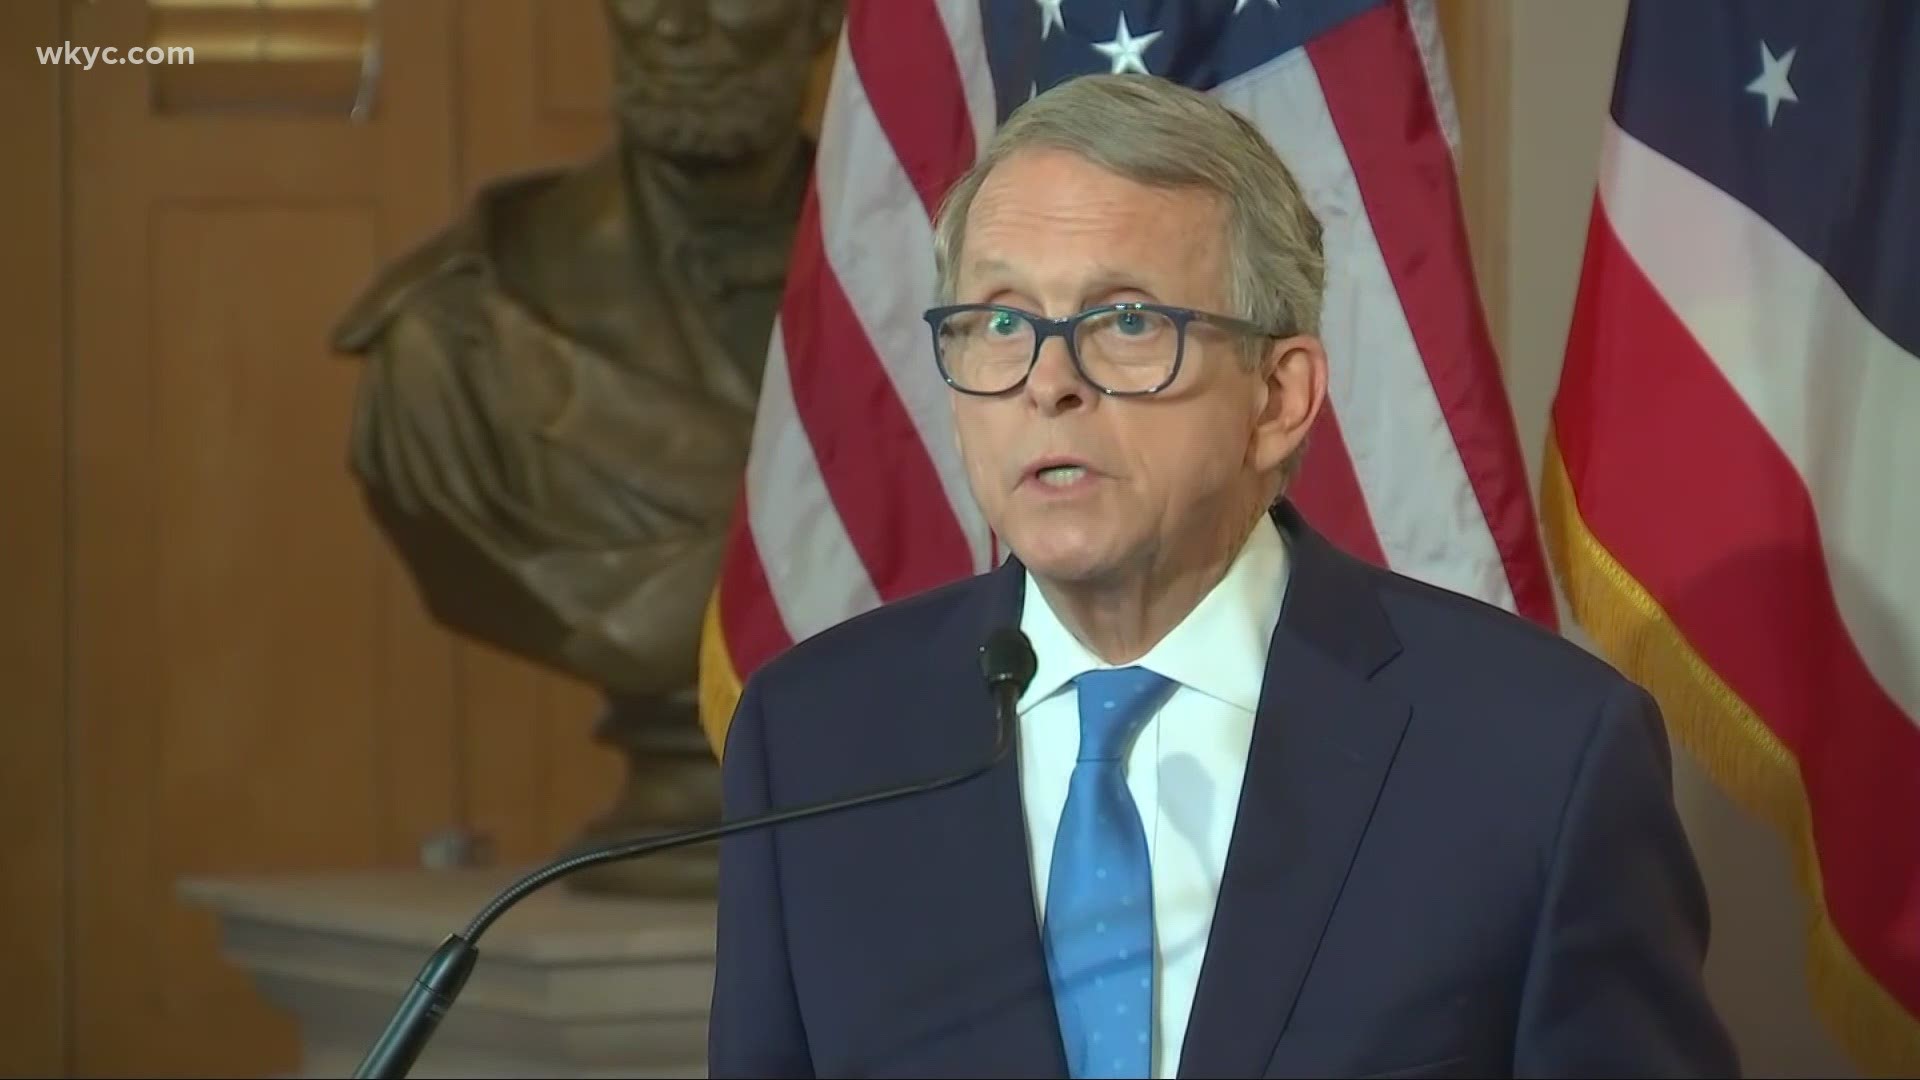 Gov. DeWine signed an executive order todaythat will allow them to profit off their name, images and likeness.